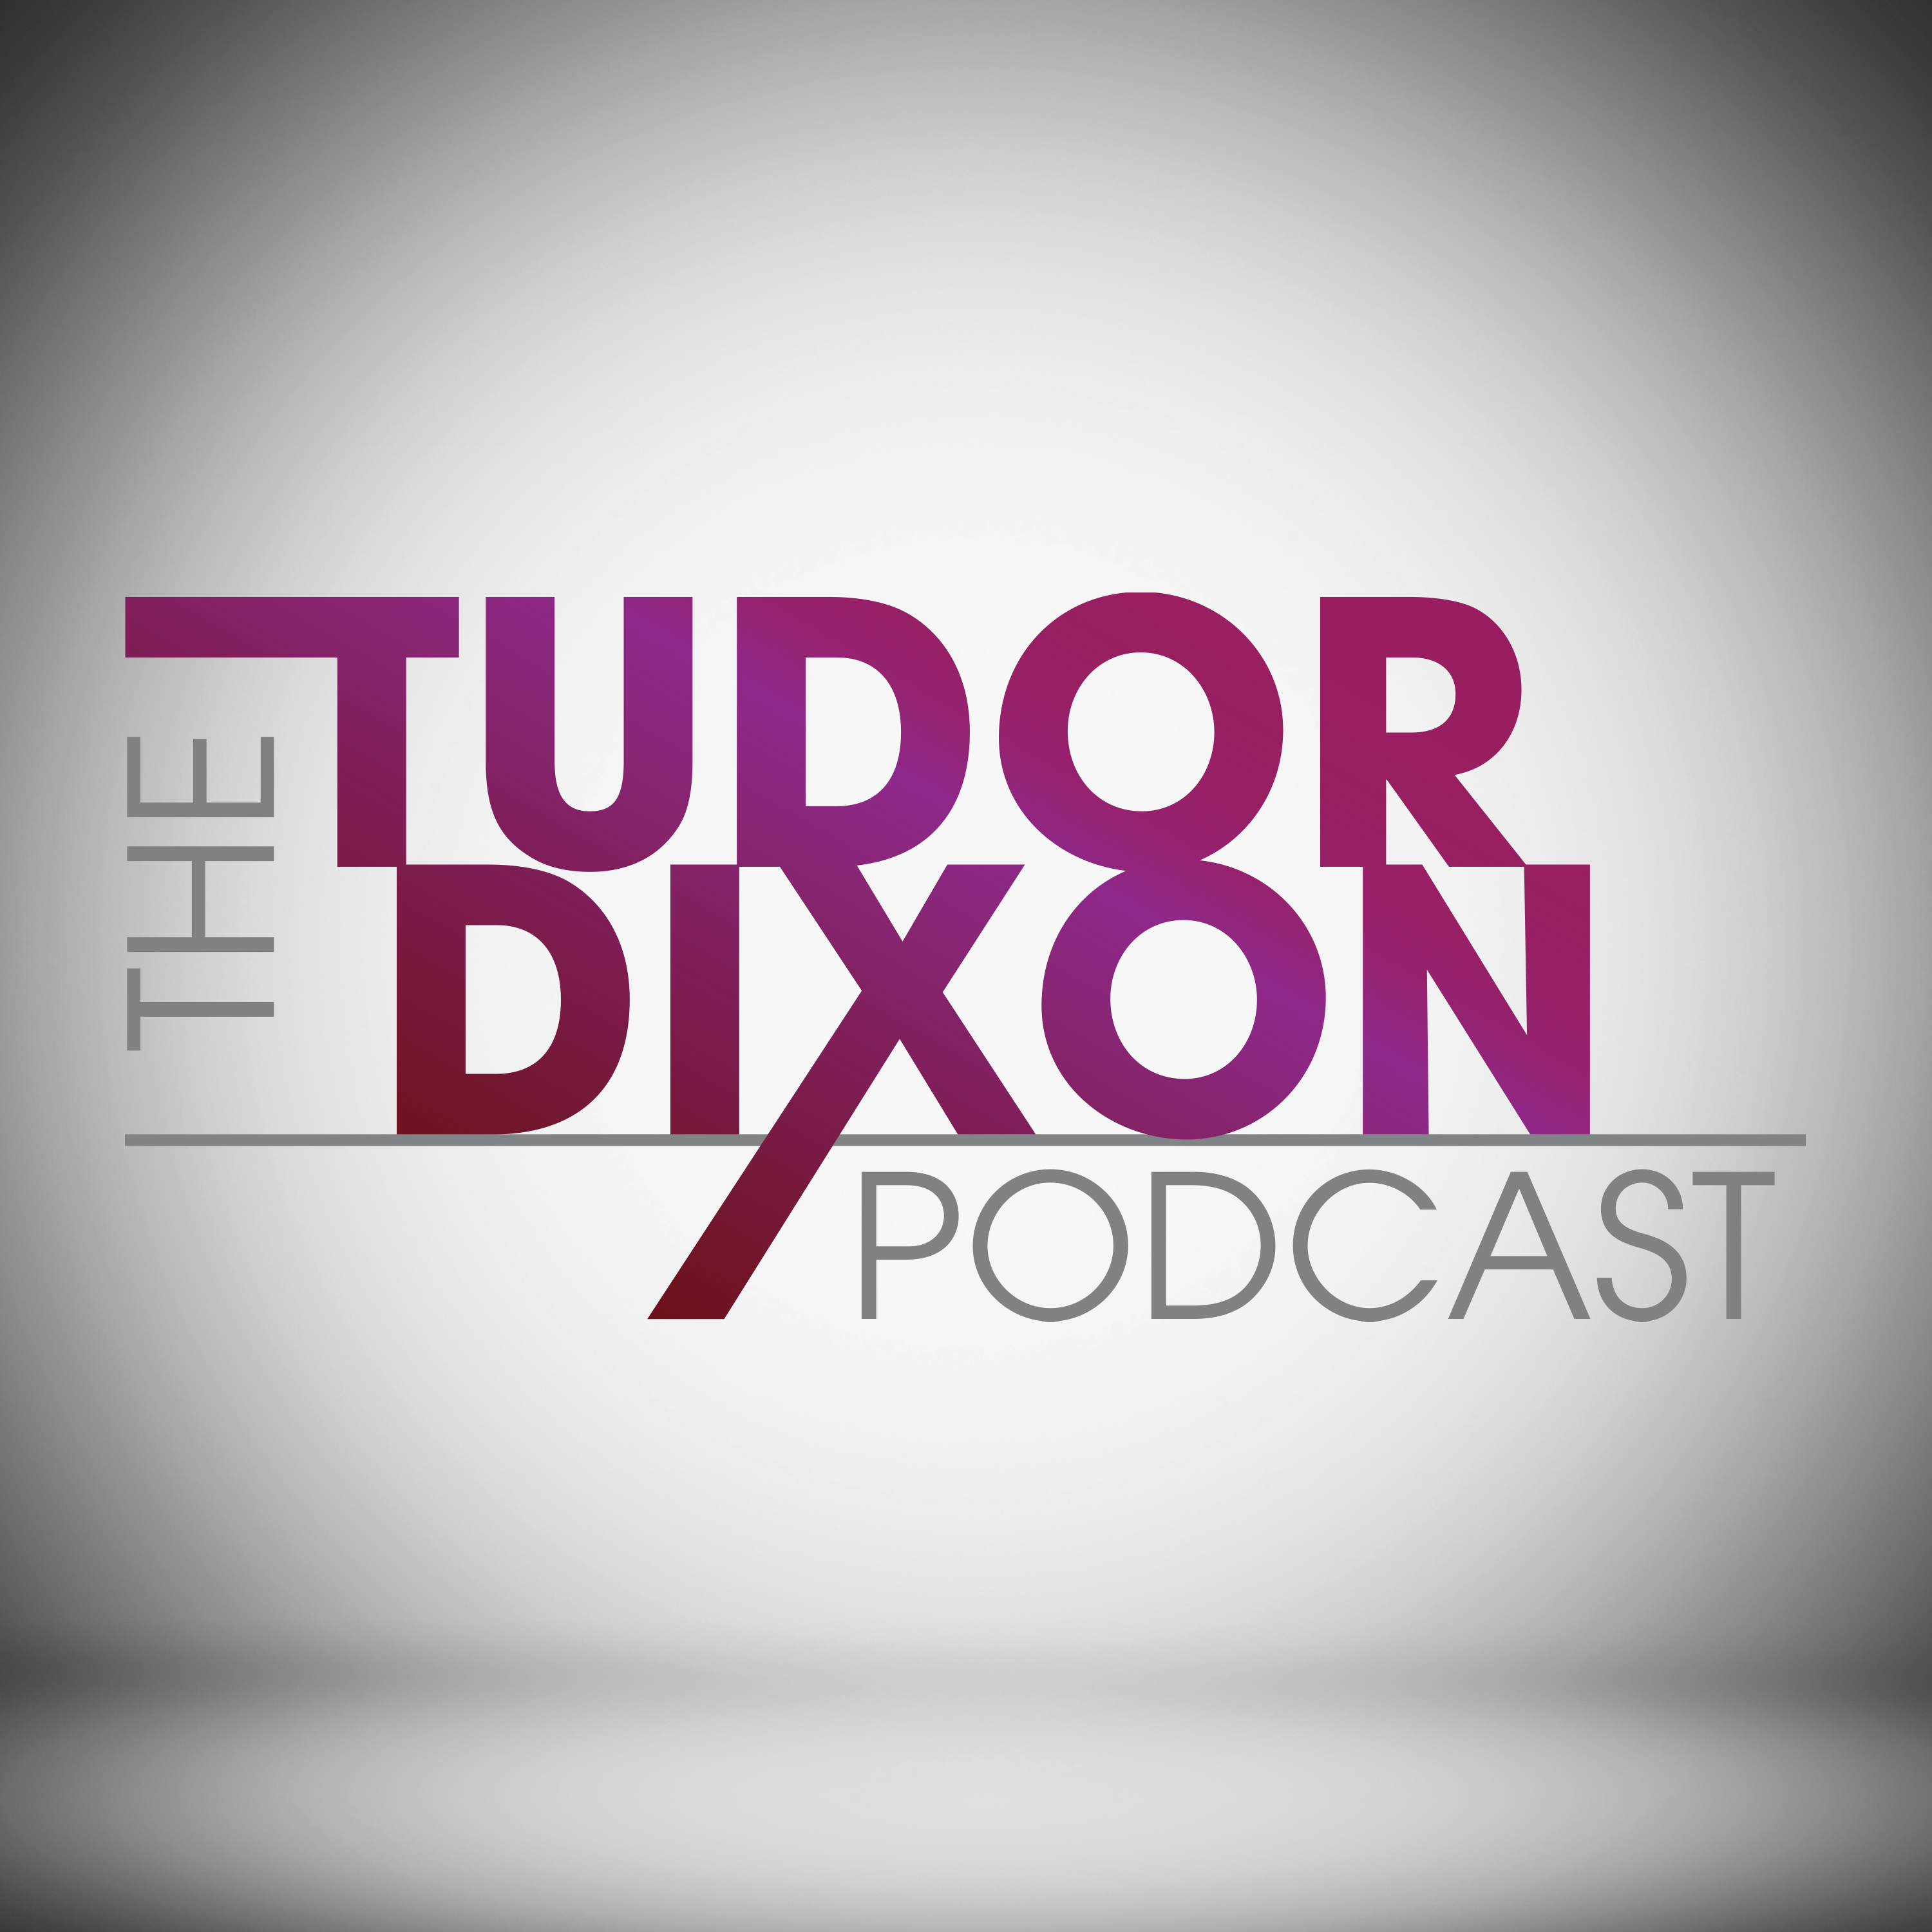 The Tudor Dixon Podcast: The Dangers of Biden’s Open Border Policy with Abe Hamadeh